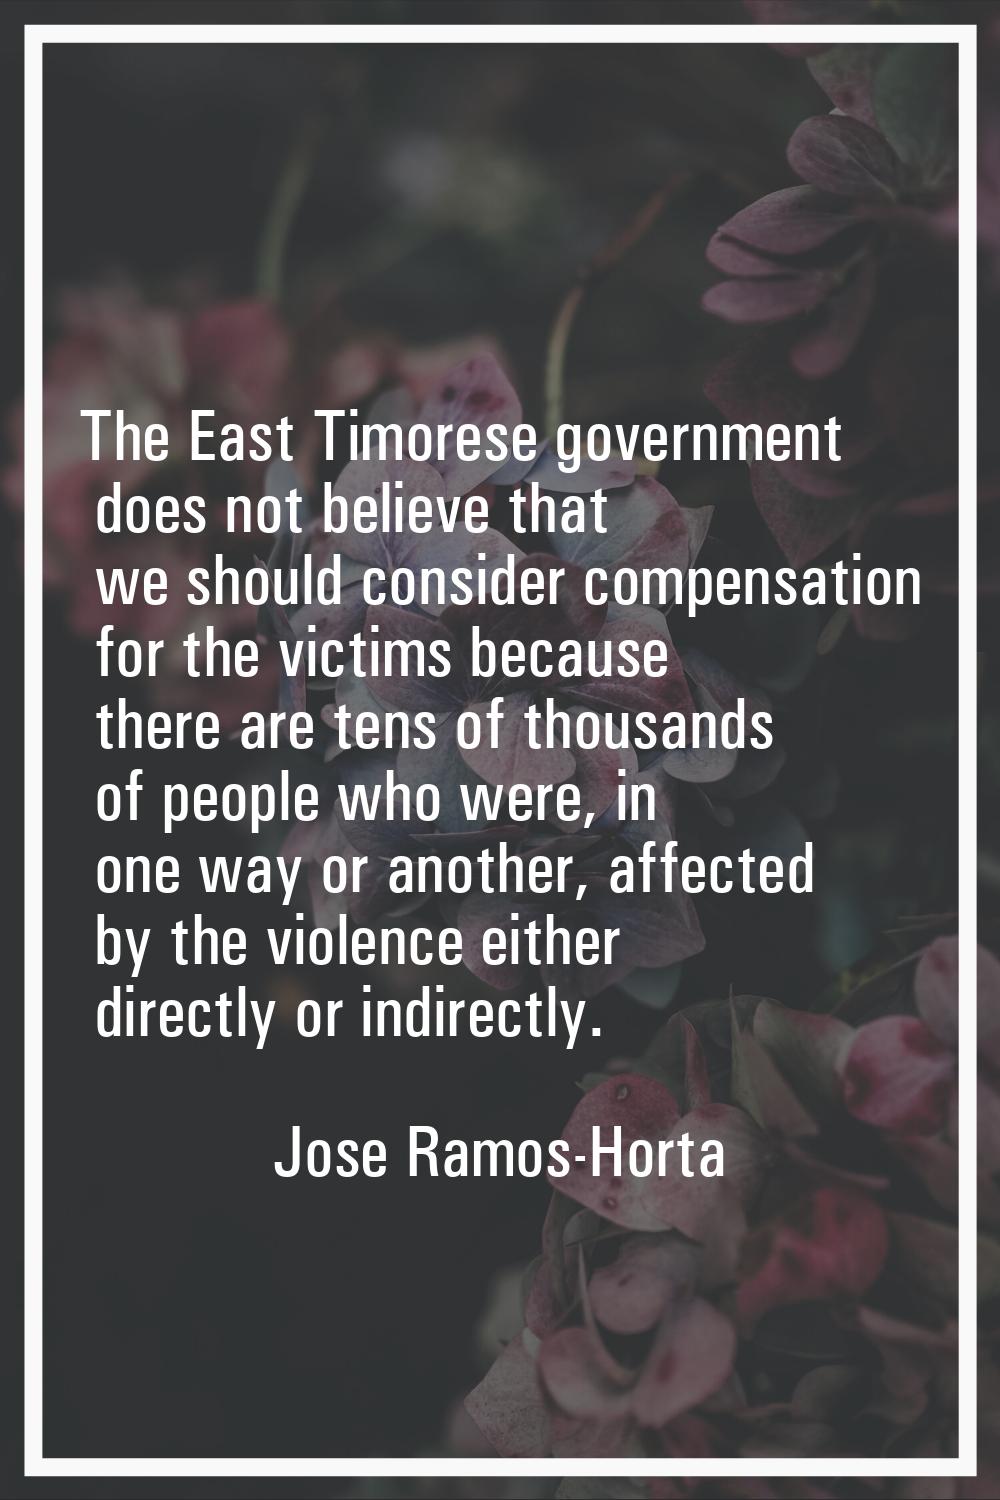 The East Timorese government does not believe that we should consider compensation for the victims 